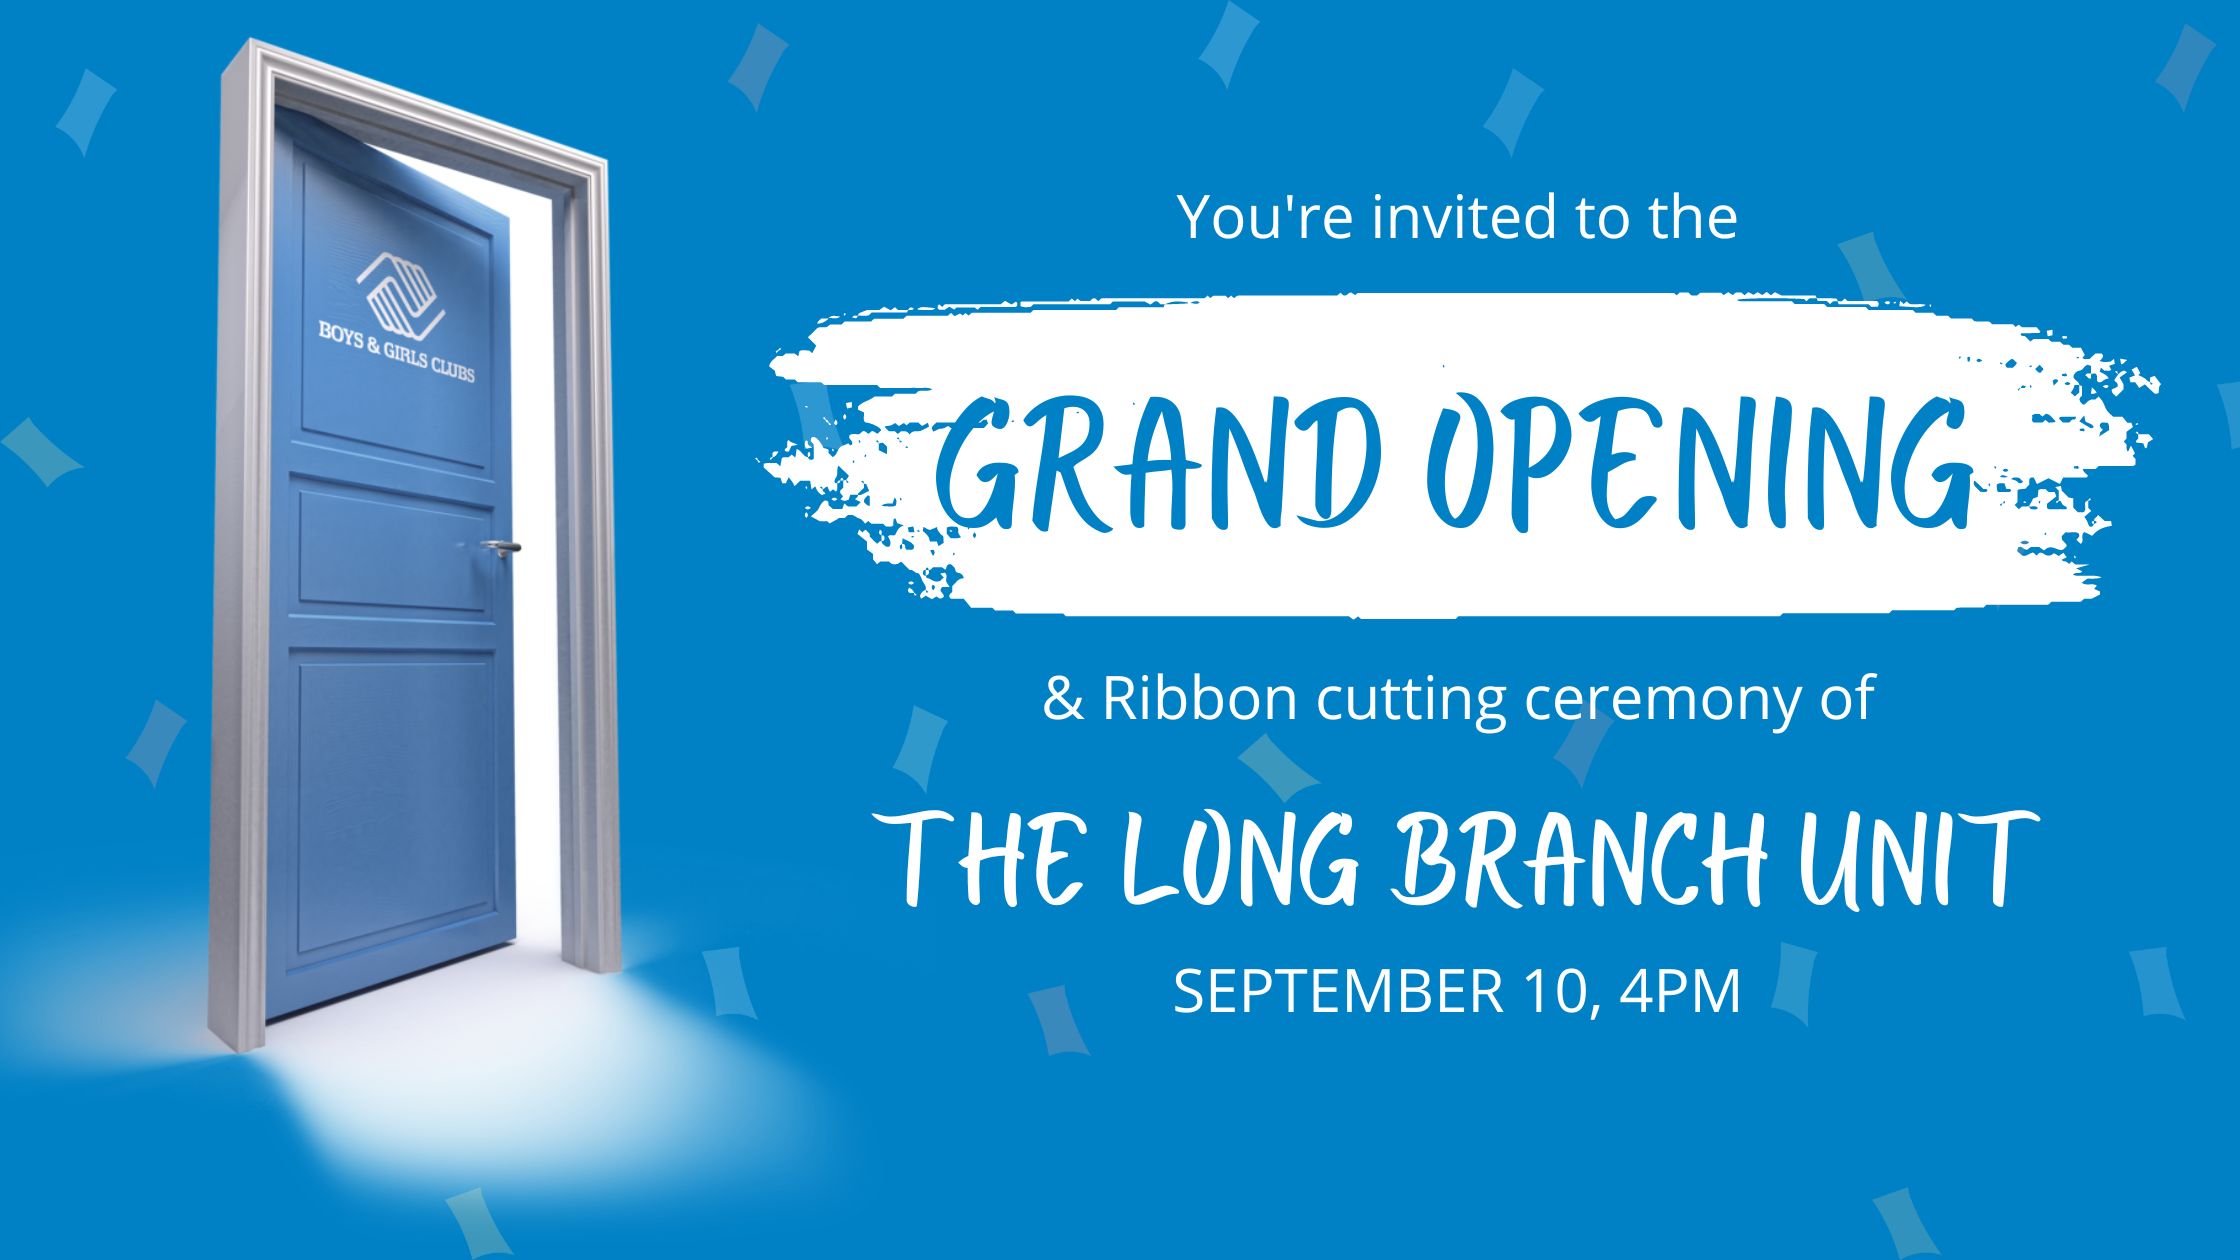 You're invited to the Grand Opening and Ribbon Cutting Ceremony of The Long Branch Unit on Steptember 10 at 4:00 PM